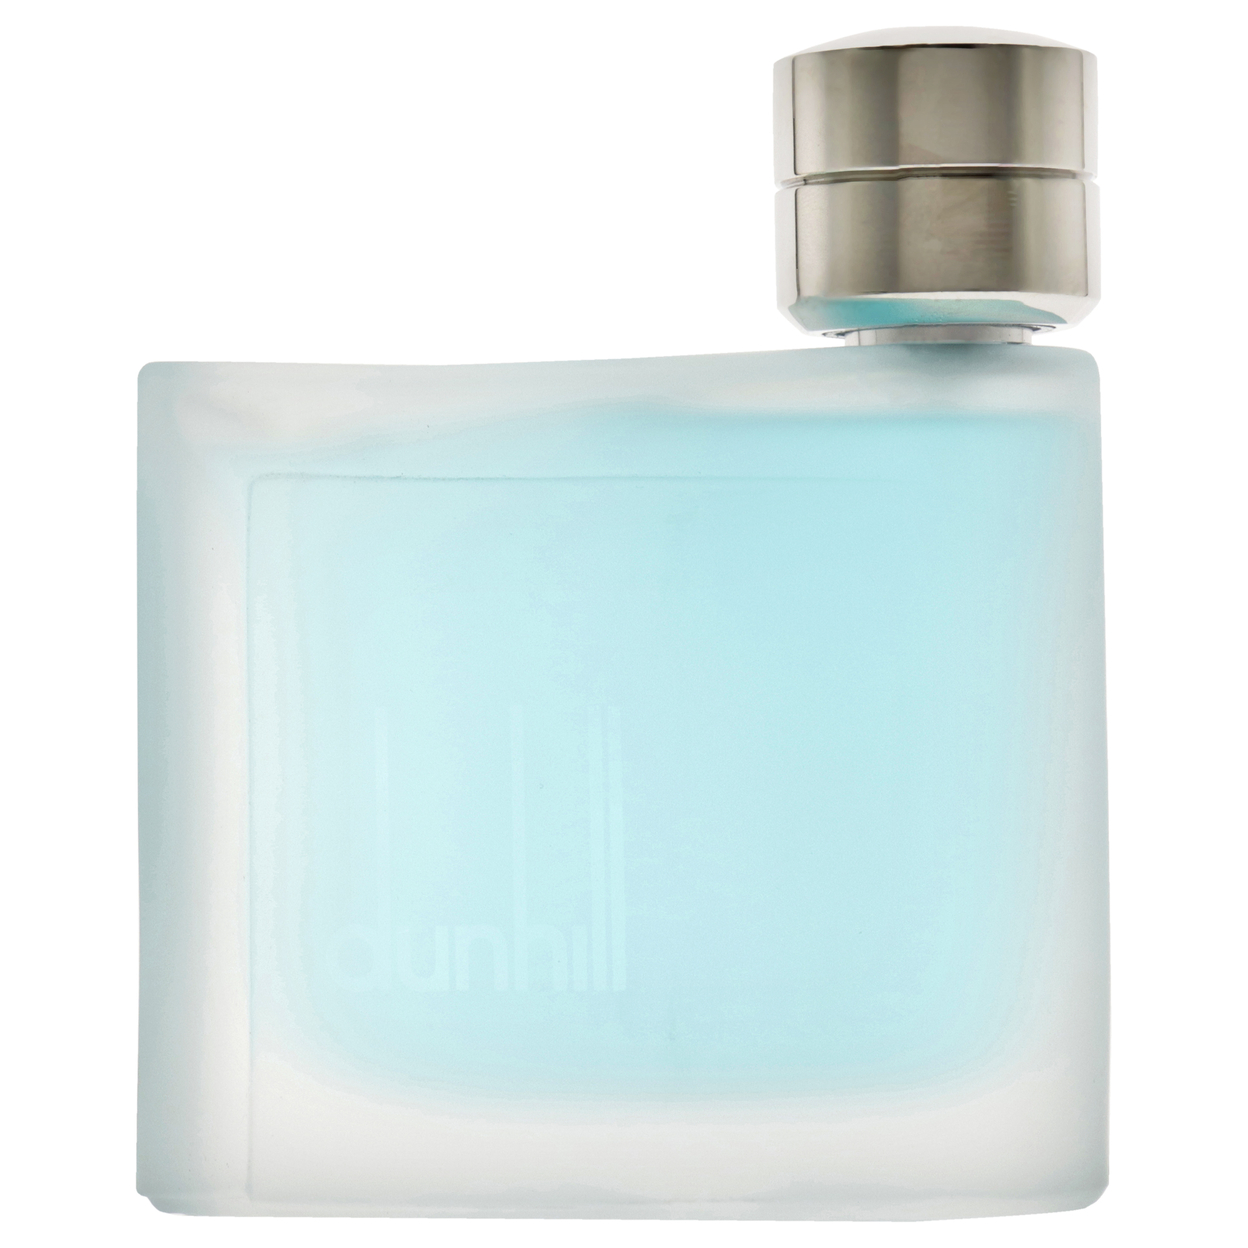 Alfred Dunhill Dunhill London Pure EDT Spray 2.5 Oz